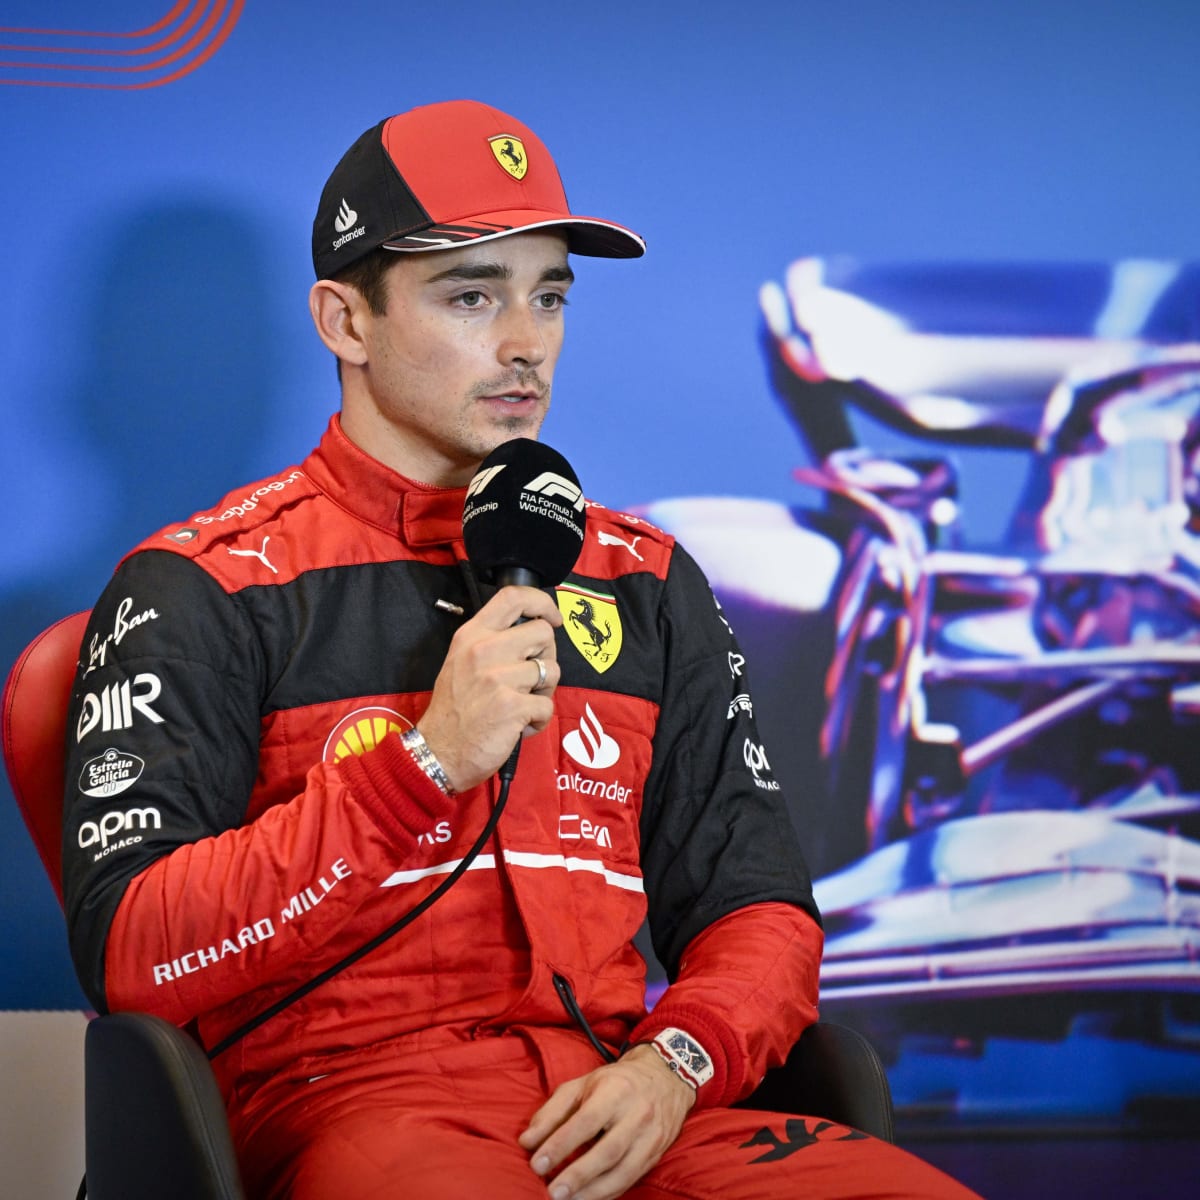 F1 News: Former Ferrari Manager Plays Into Charles Leclerc Mercedes Rumours  With Future Speculations - F1 Briefings: Formula 1 News, Rumors, Standings  and More